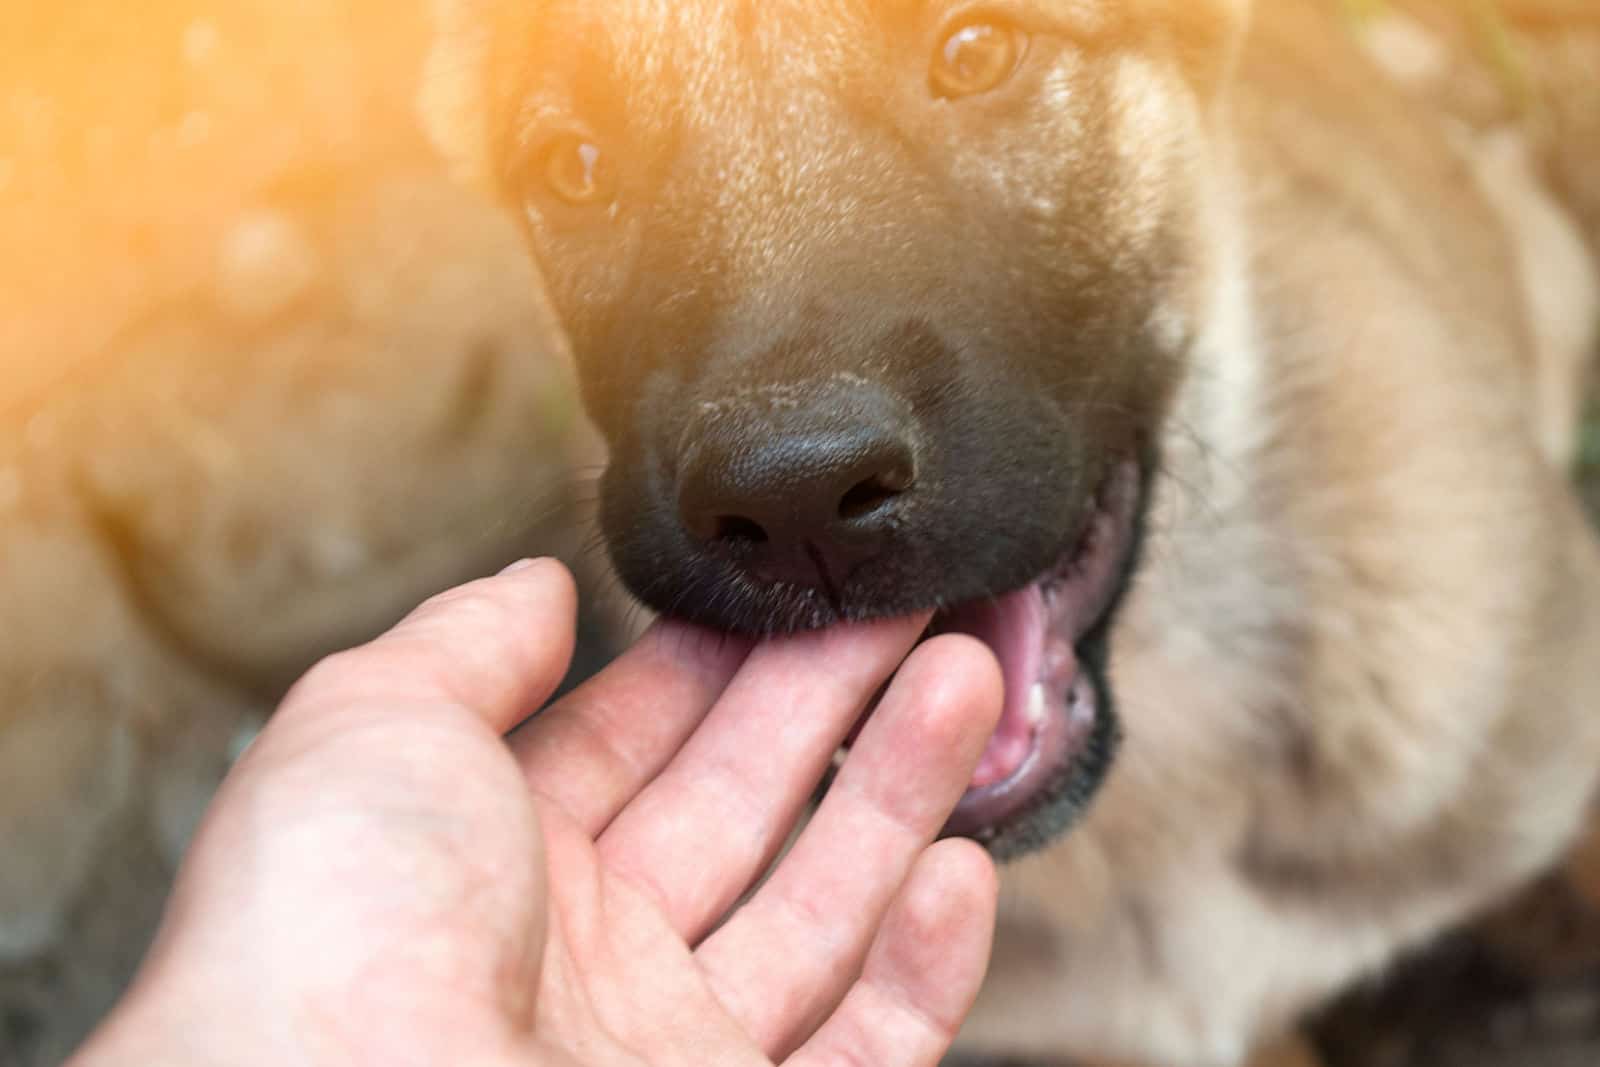 A small German shepherd puppy plays and bites a woman's finger.